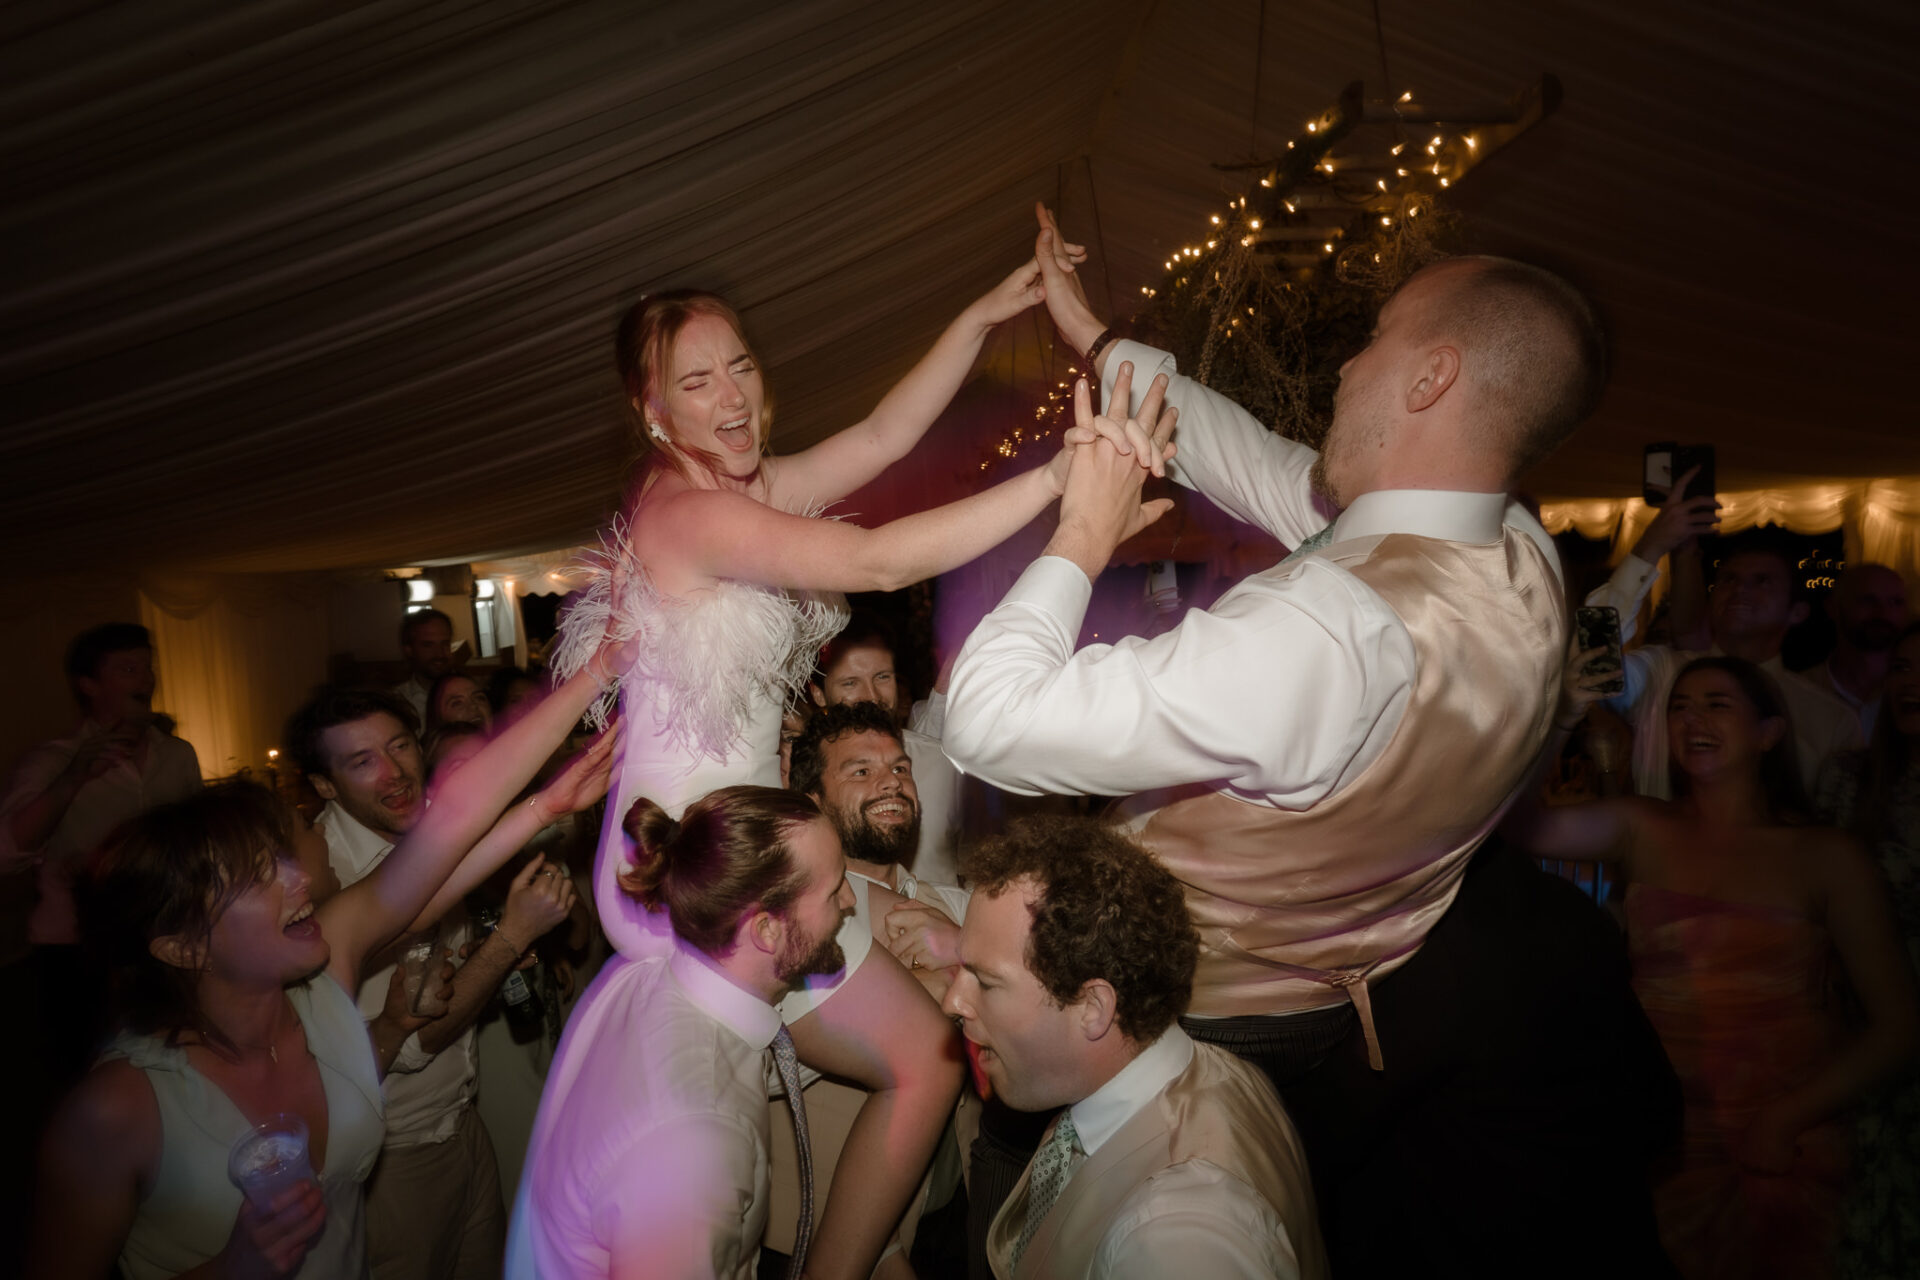 A couple dancing at a wedding.